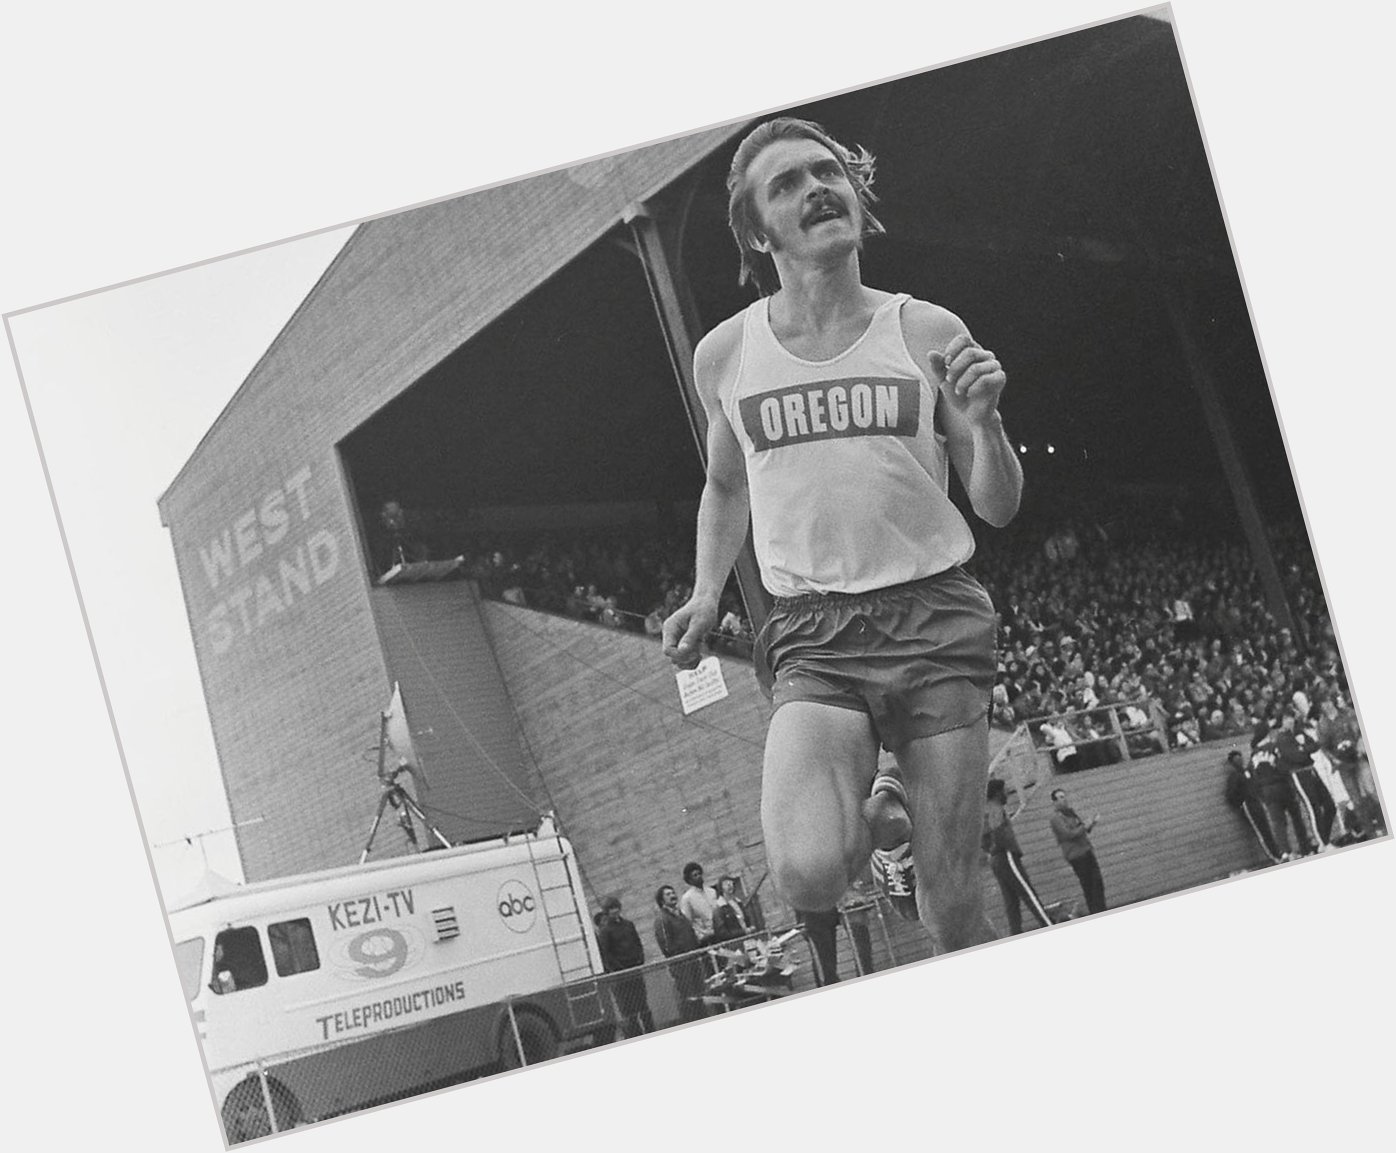 Today would have been Steve Prefontaine\s 66th birthday.

Happy Birthday, Pre!   